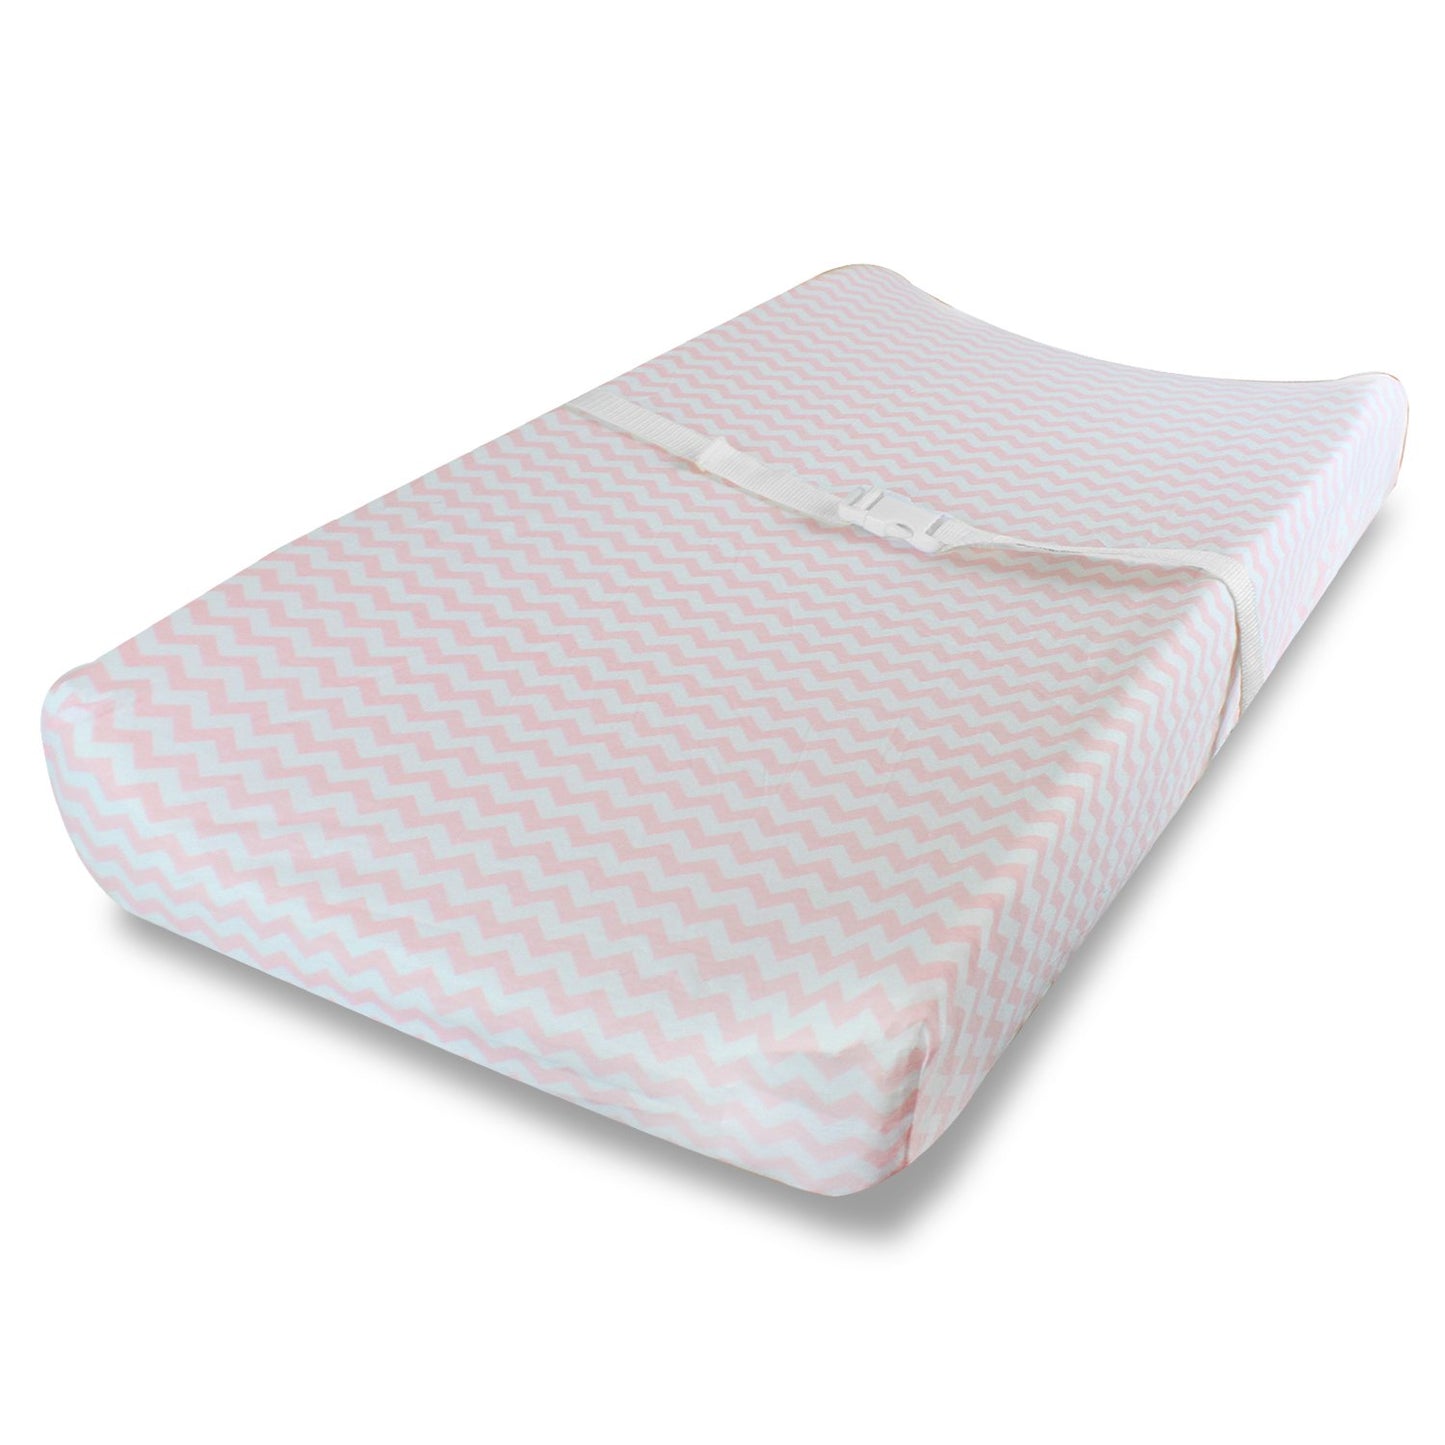 Changing Pad Covers, Cradle Bassinet Sheets Fitted Jersey Cotton (2 Pack) Pink, White